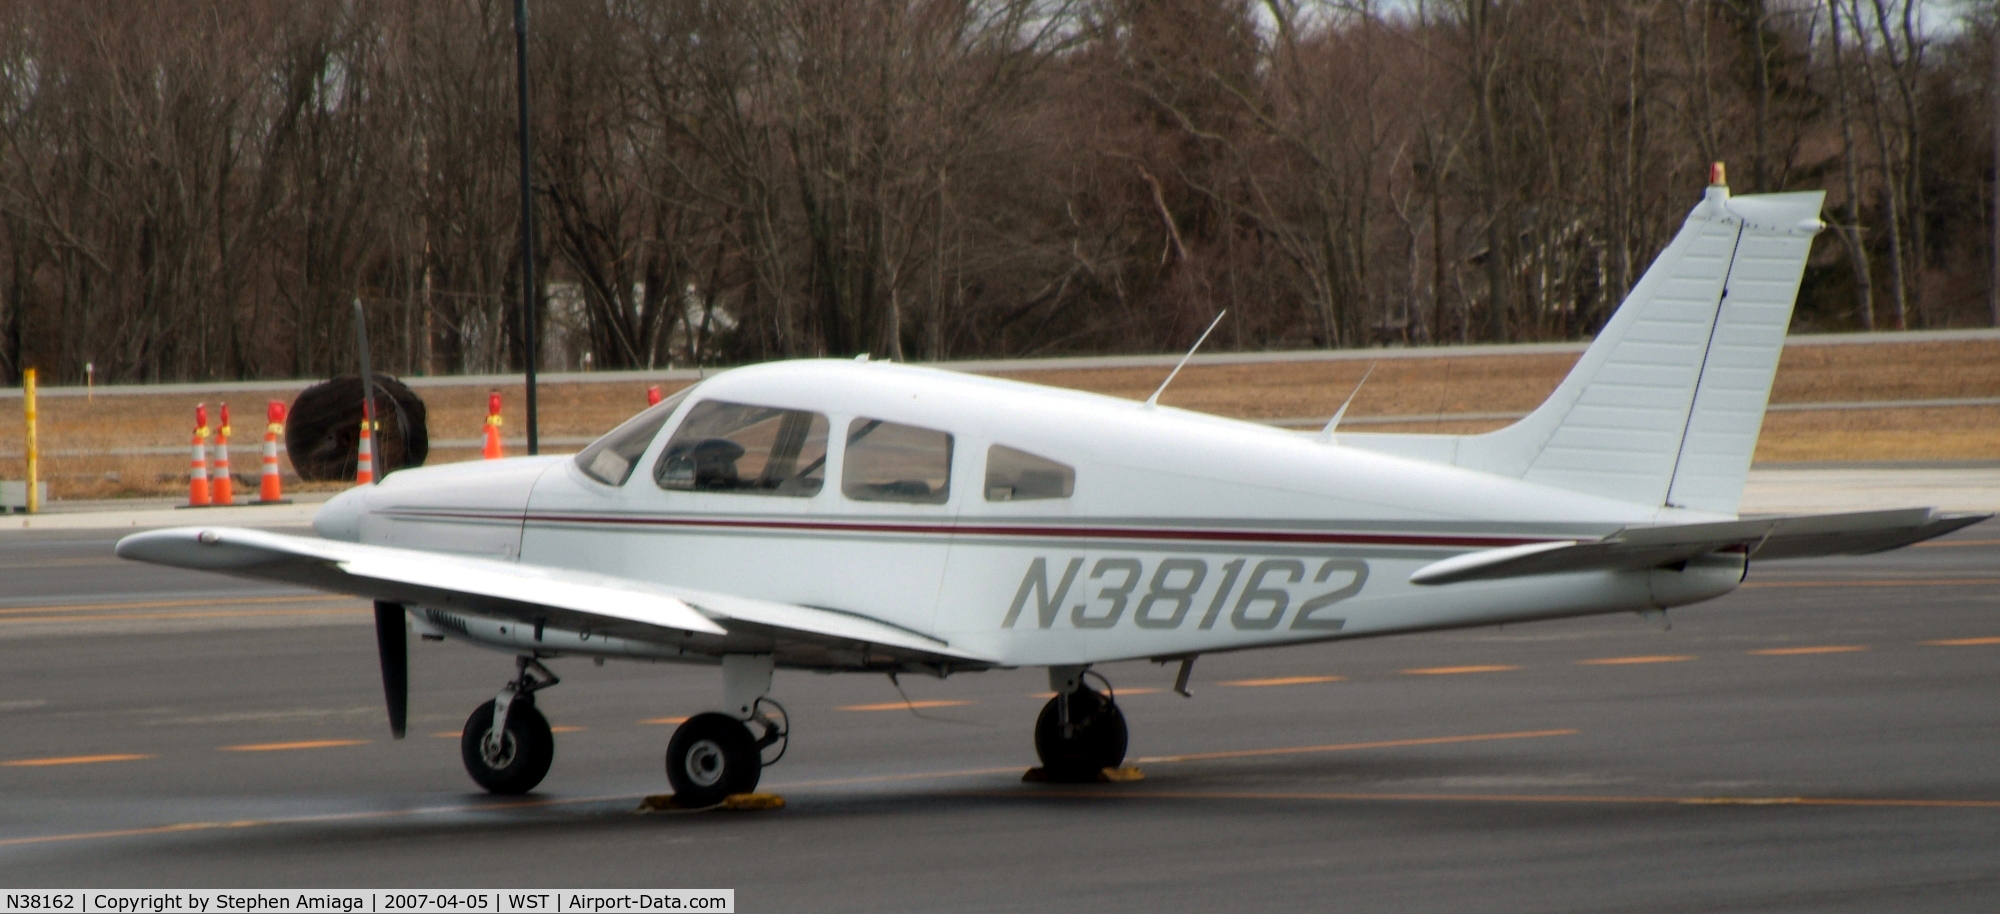 N38162, 1977 Piper PA-28-181 C/N 28-7790524, Archer on the ramp - New England Airlines